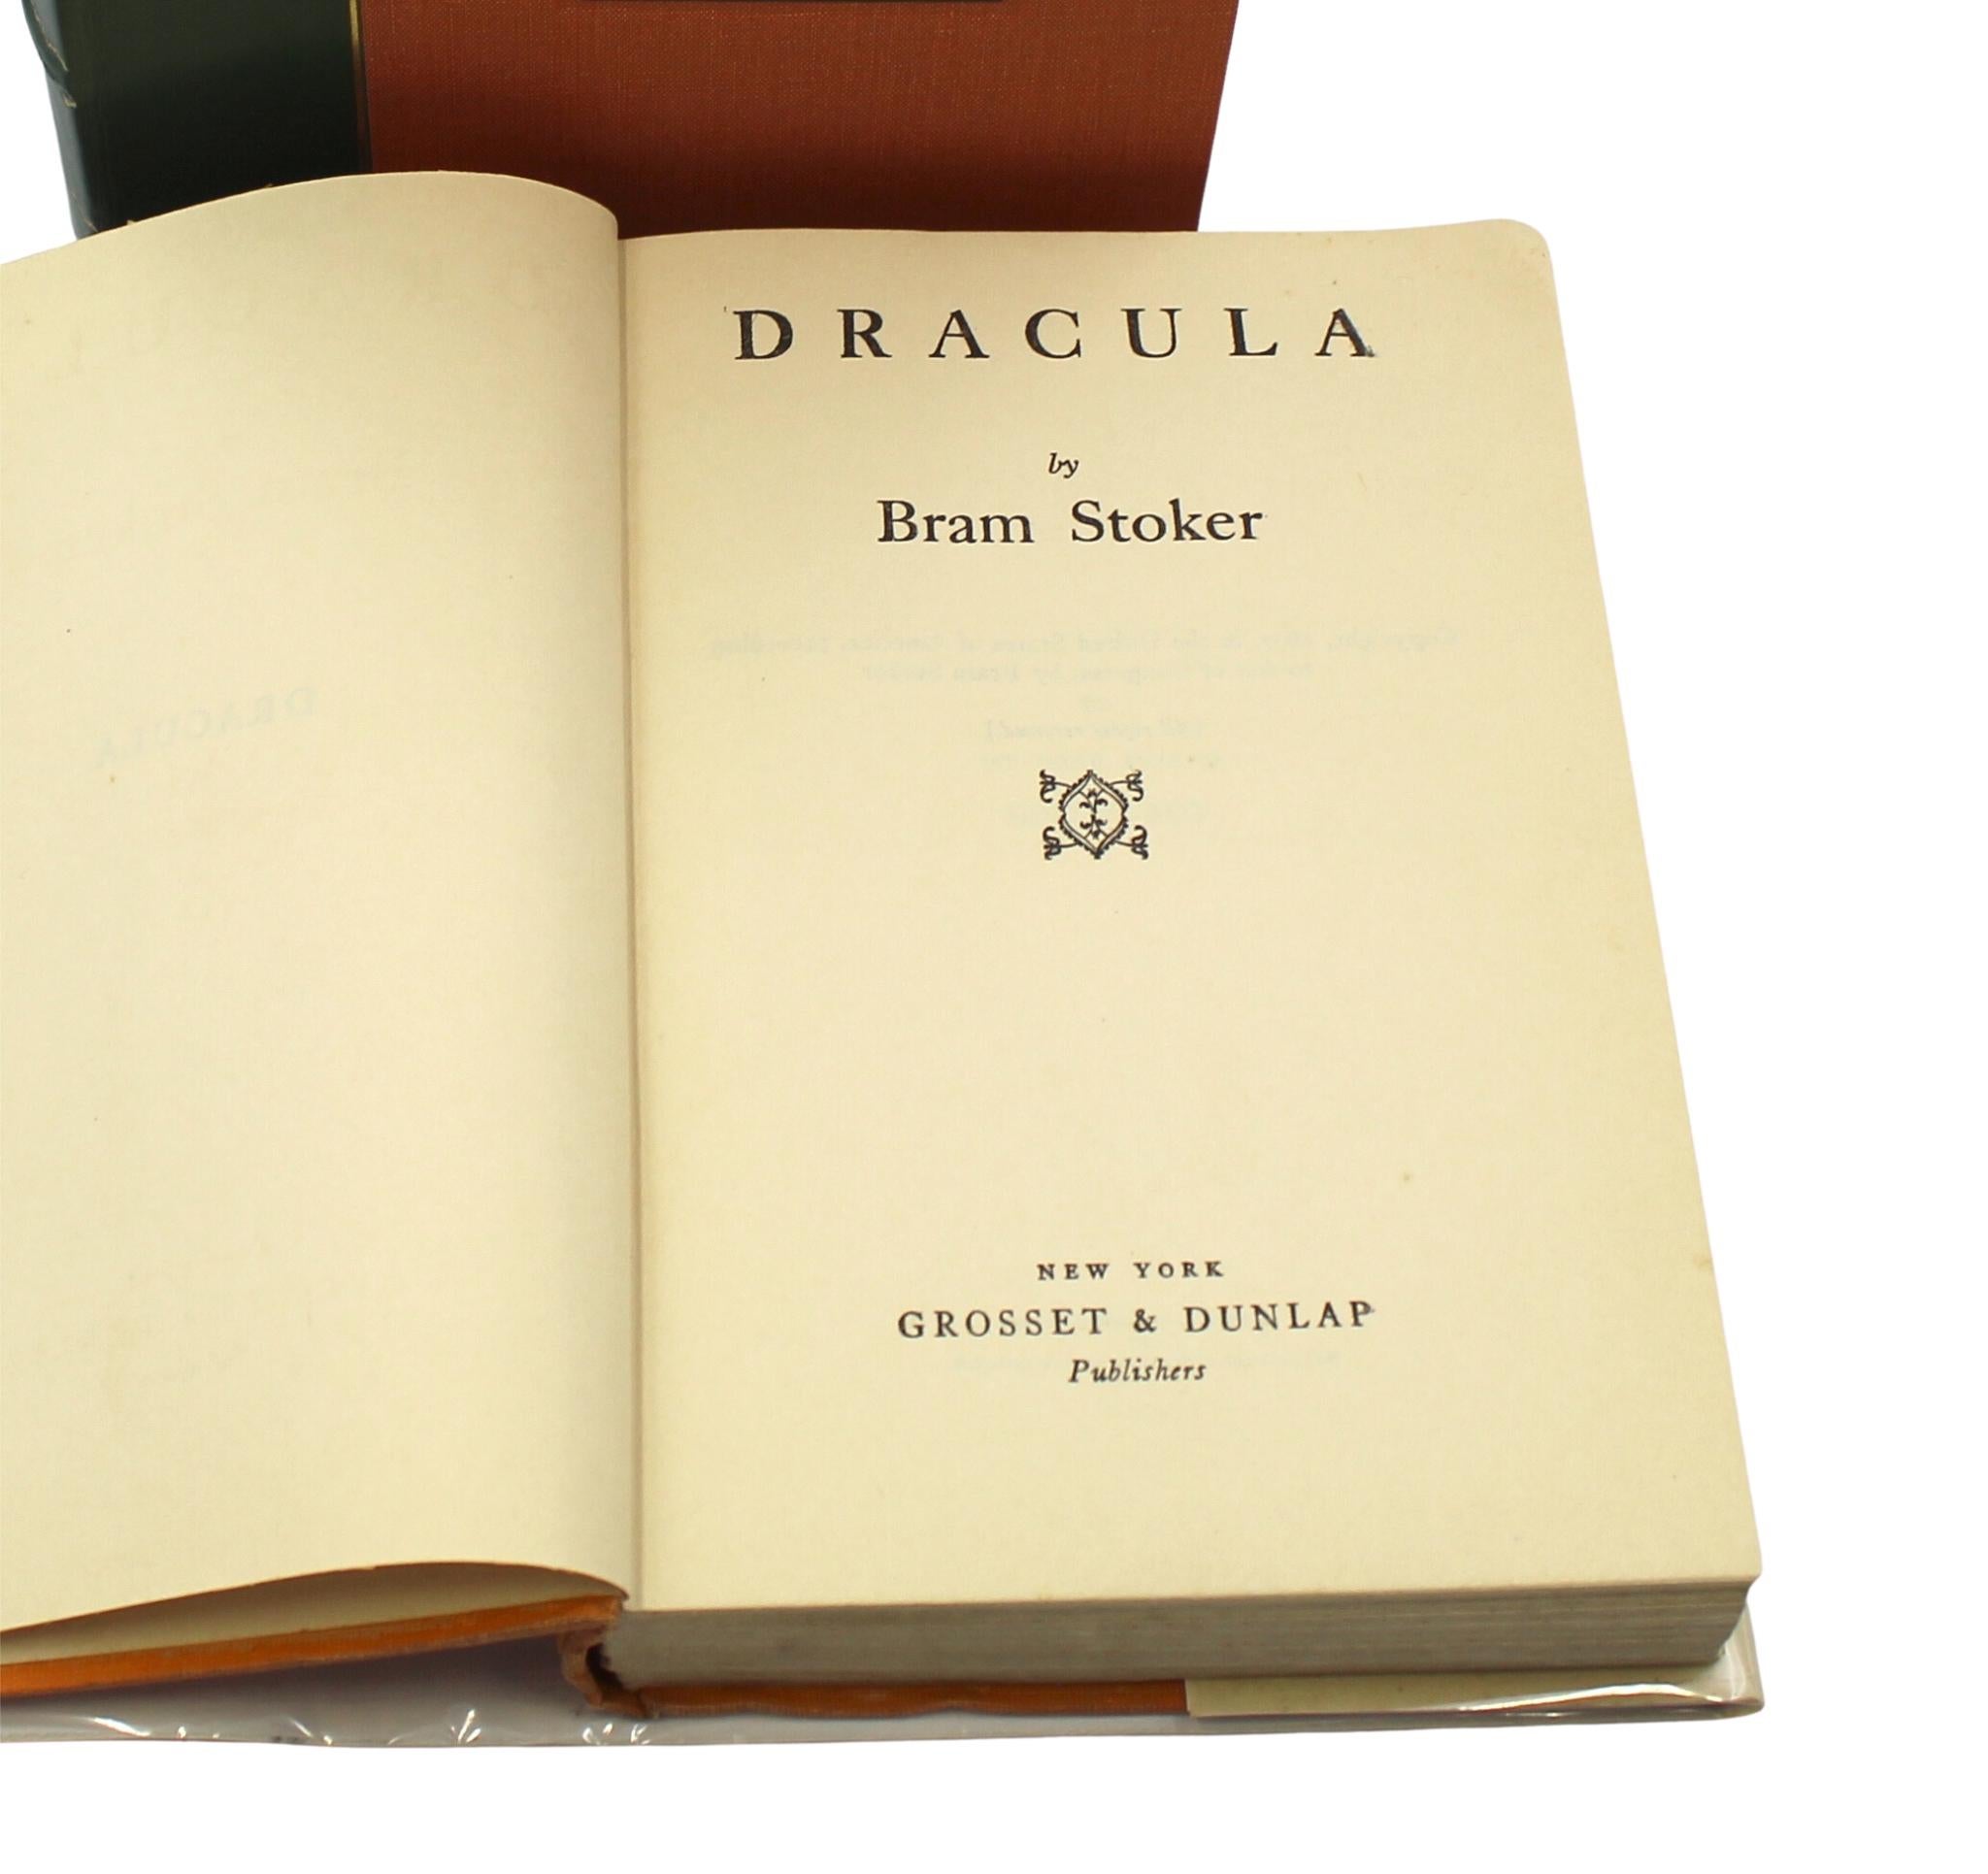 Dracula by Bram Stoker, First Grosset & Dunlap Edition, 1927 In Good Condition For Sale In Colorado Springs, CO